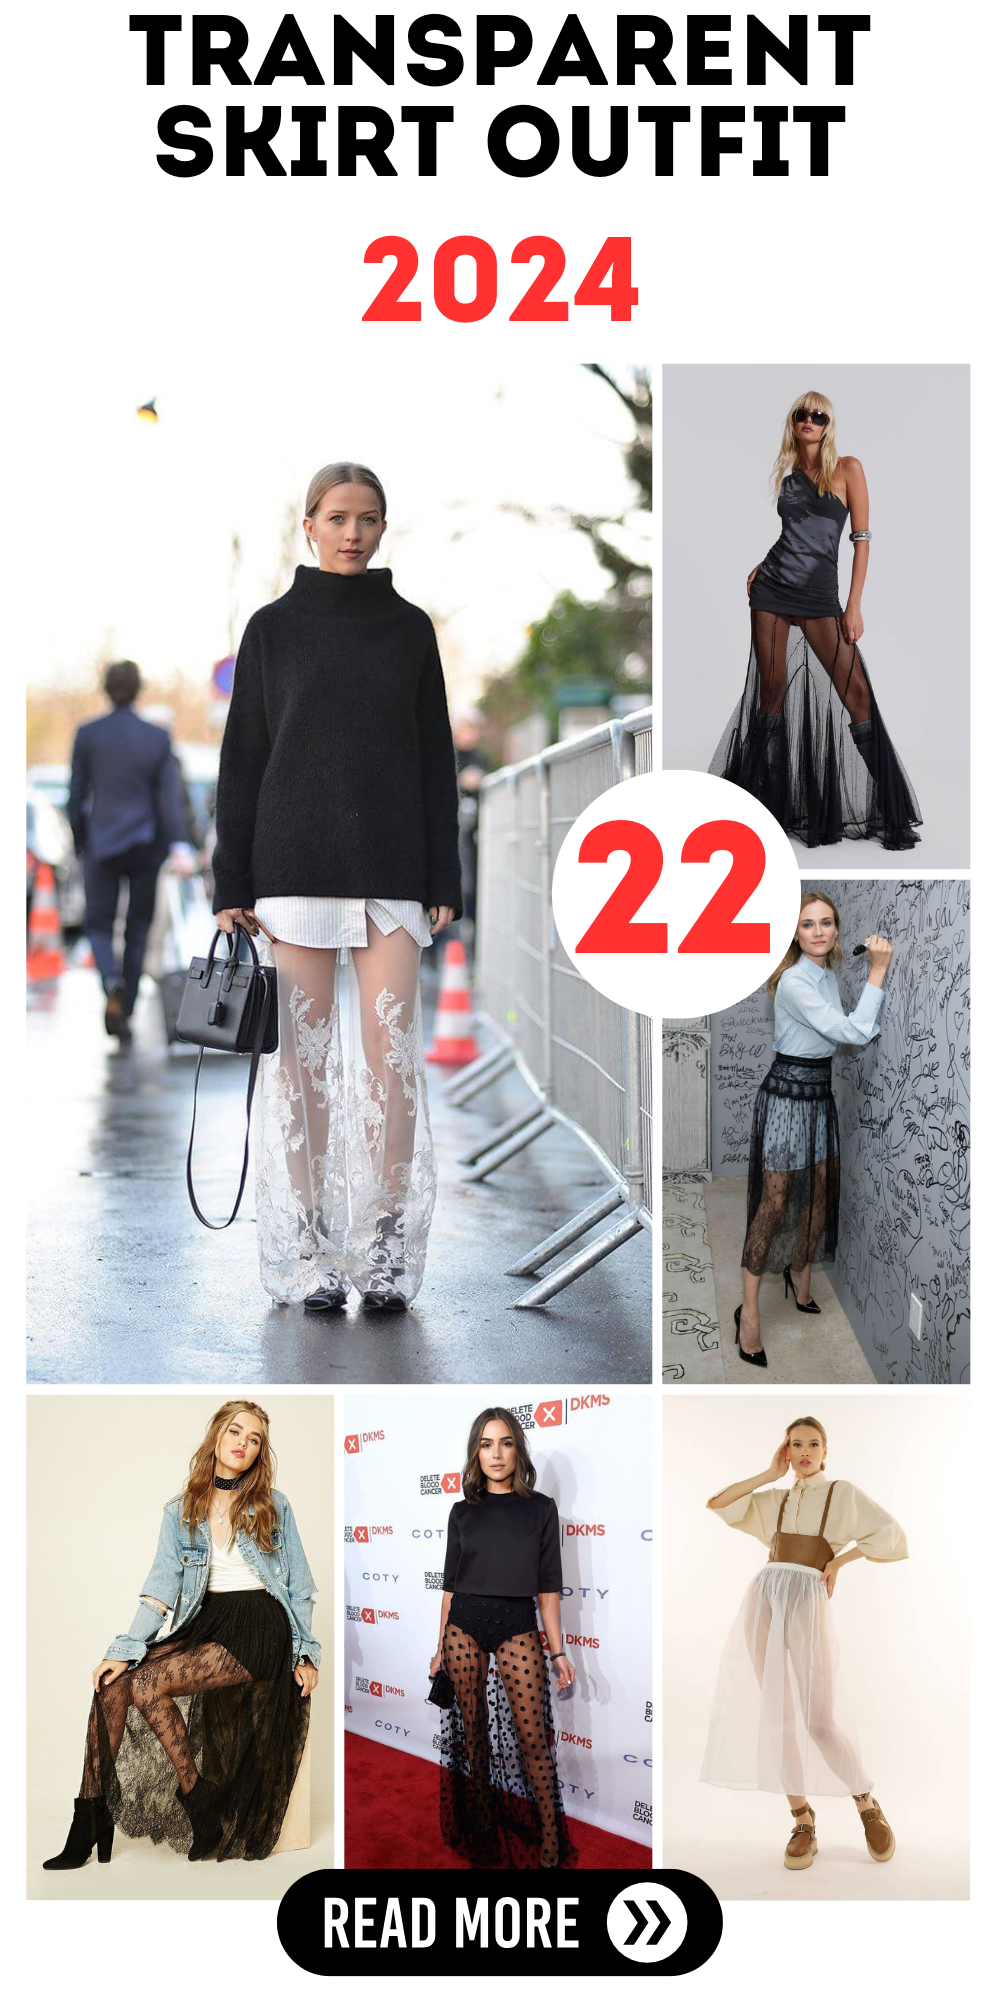 2024's Chic Transparent Skirt Outfits: Lace, Sheer Elegance & Bold